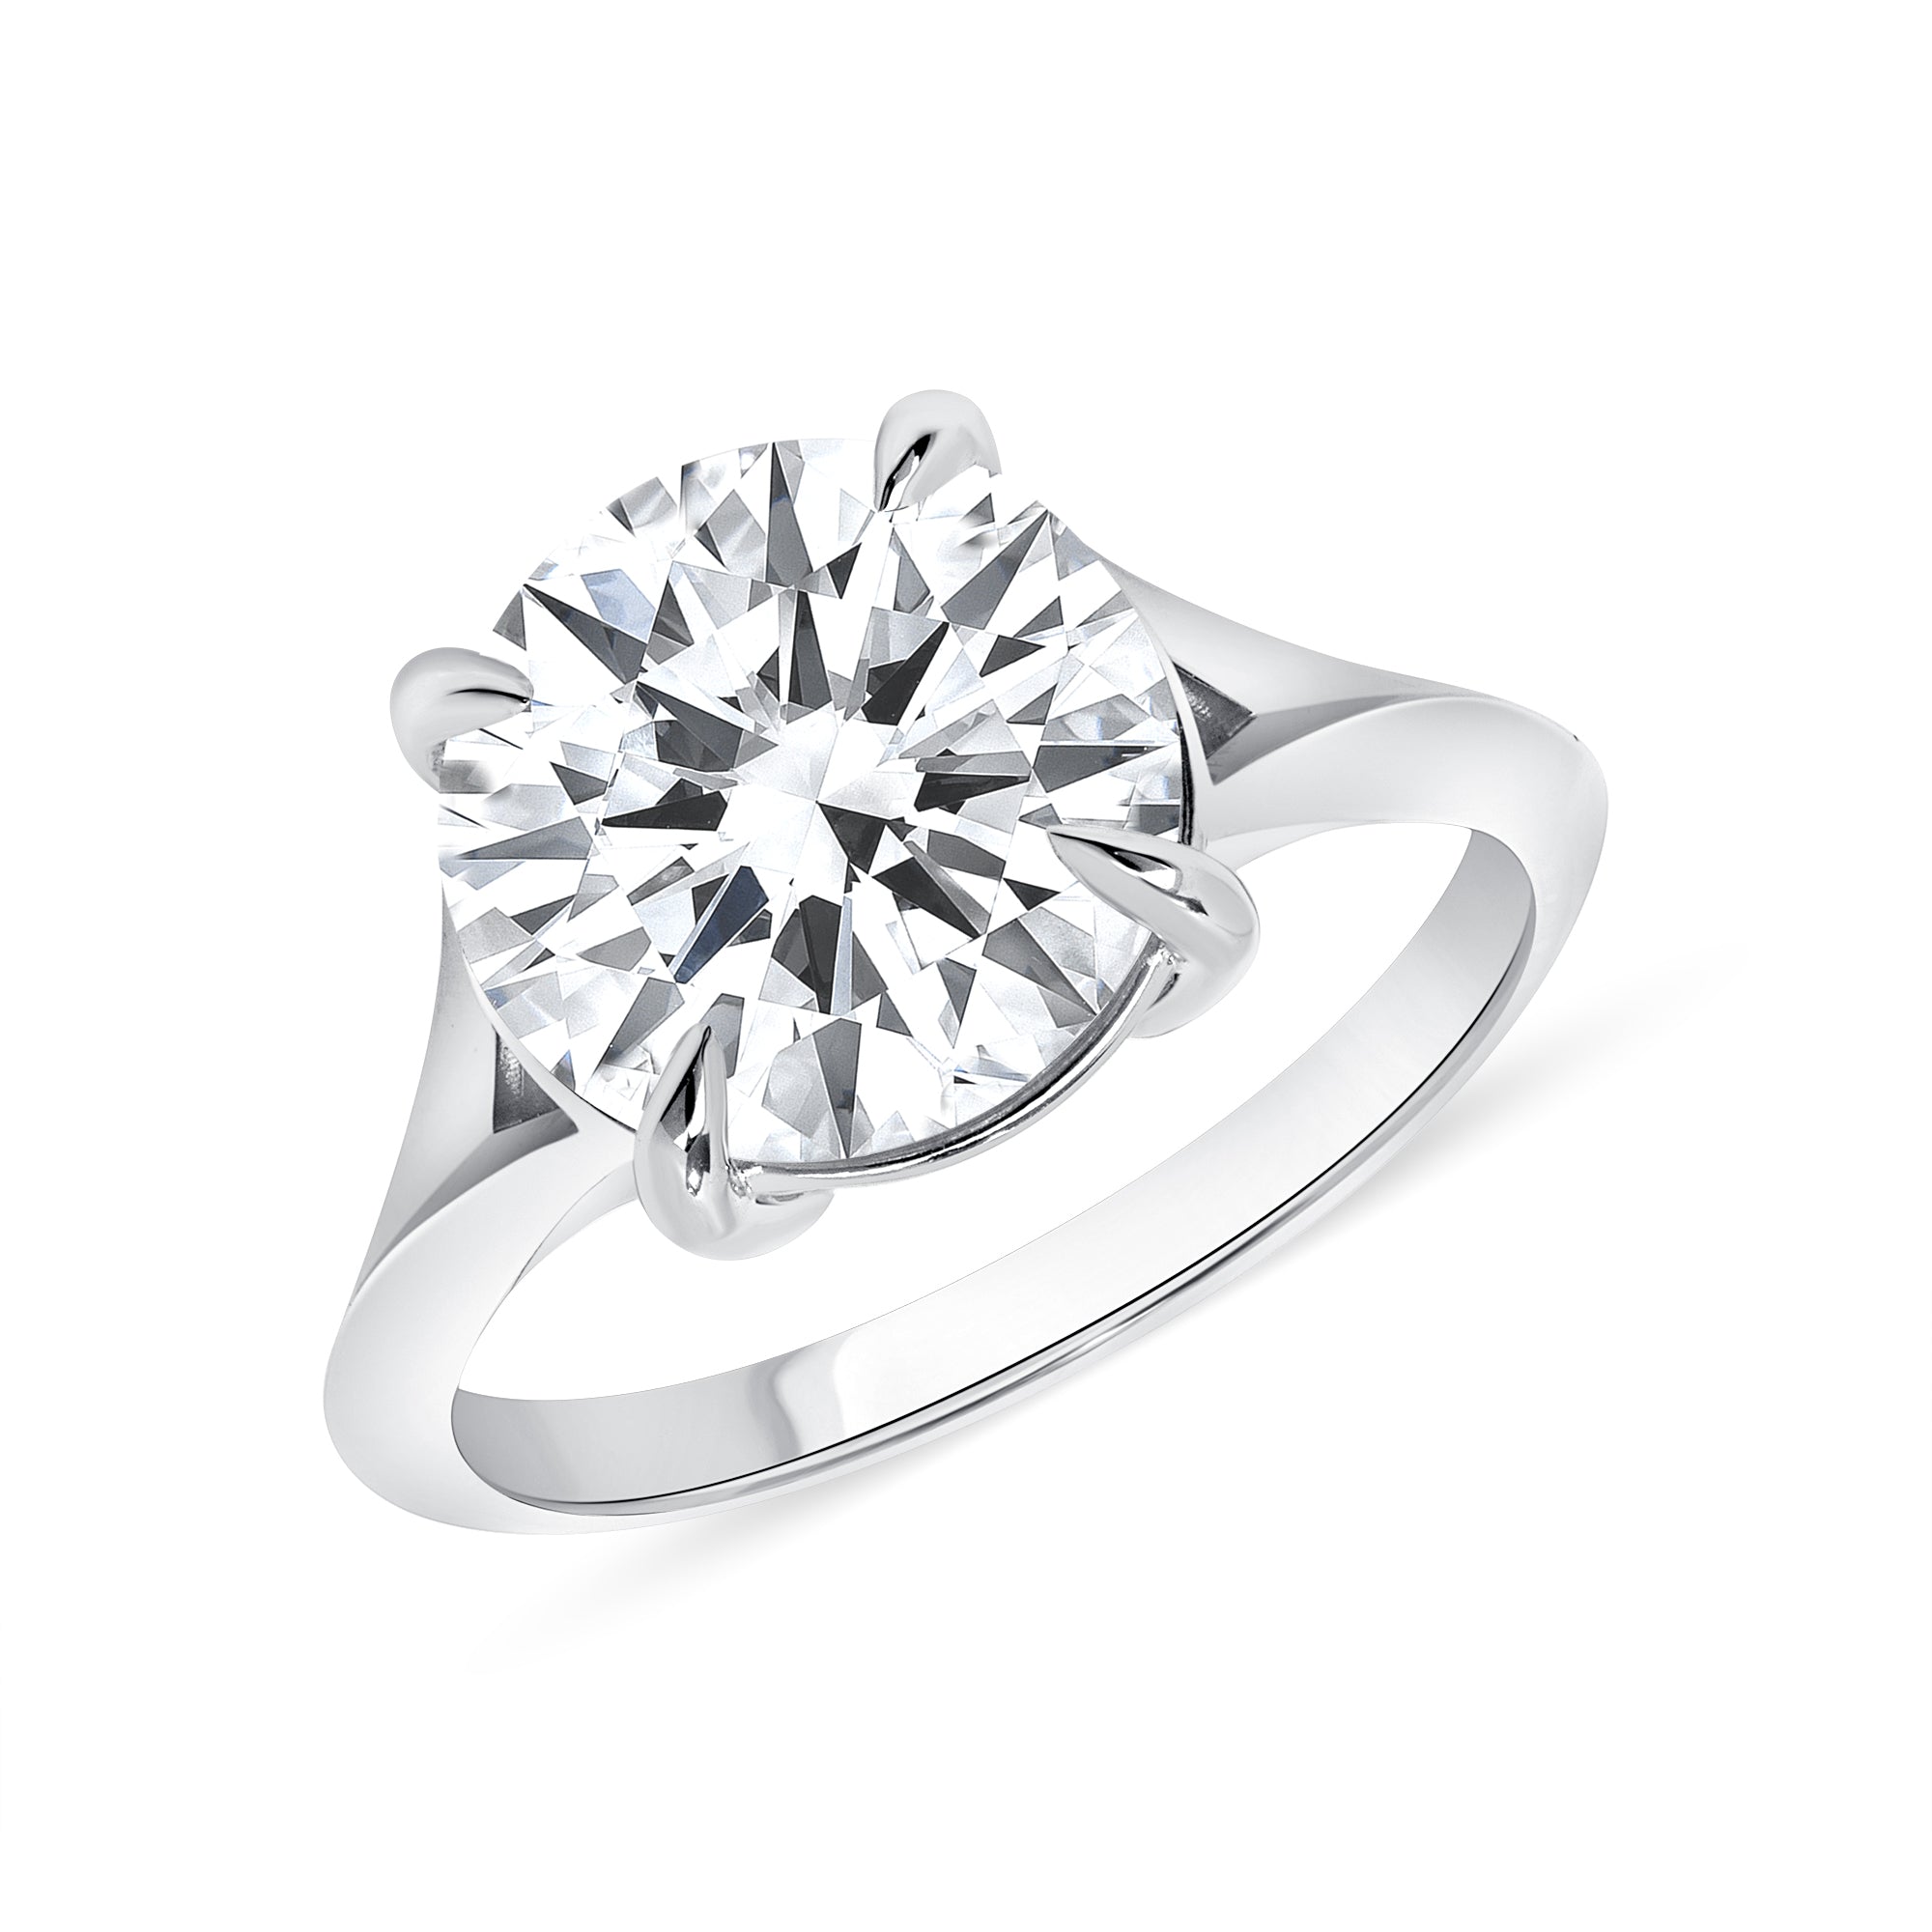 4.51ct Round Brilliant Cut Diamond Solitaire Ring in 18k White Gold Band, GIA Certified